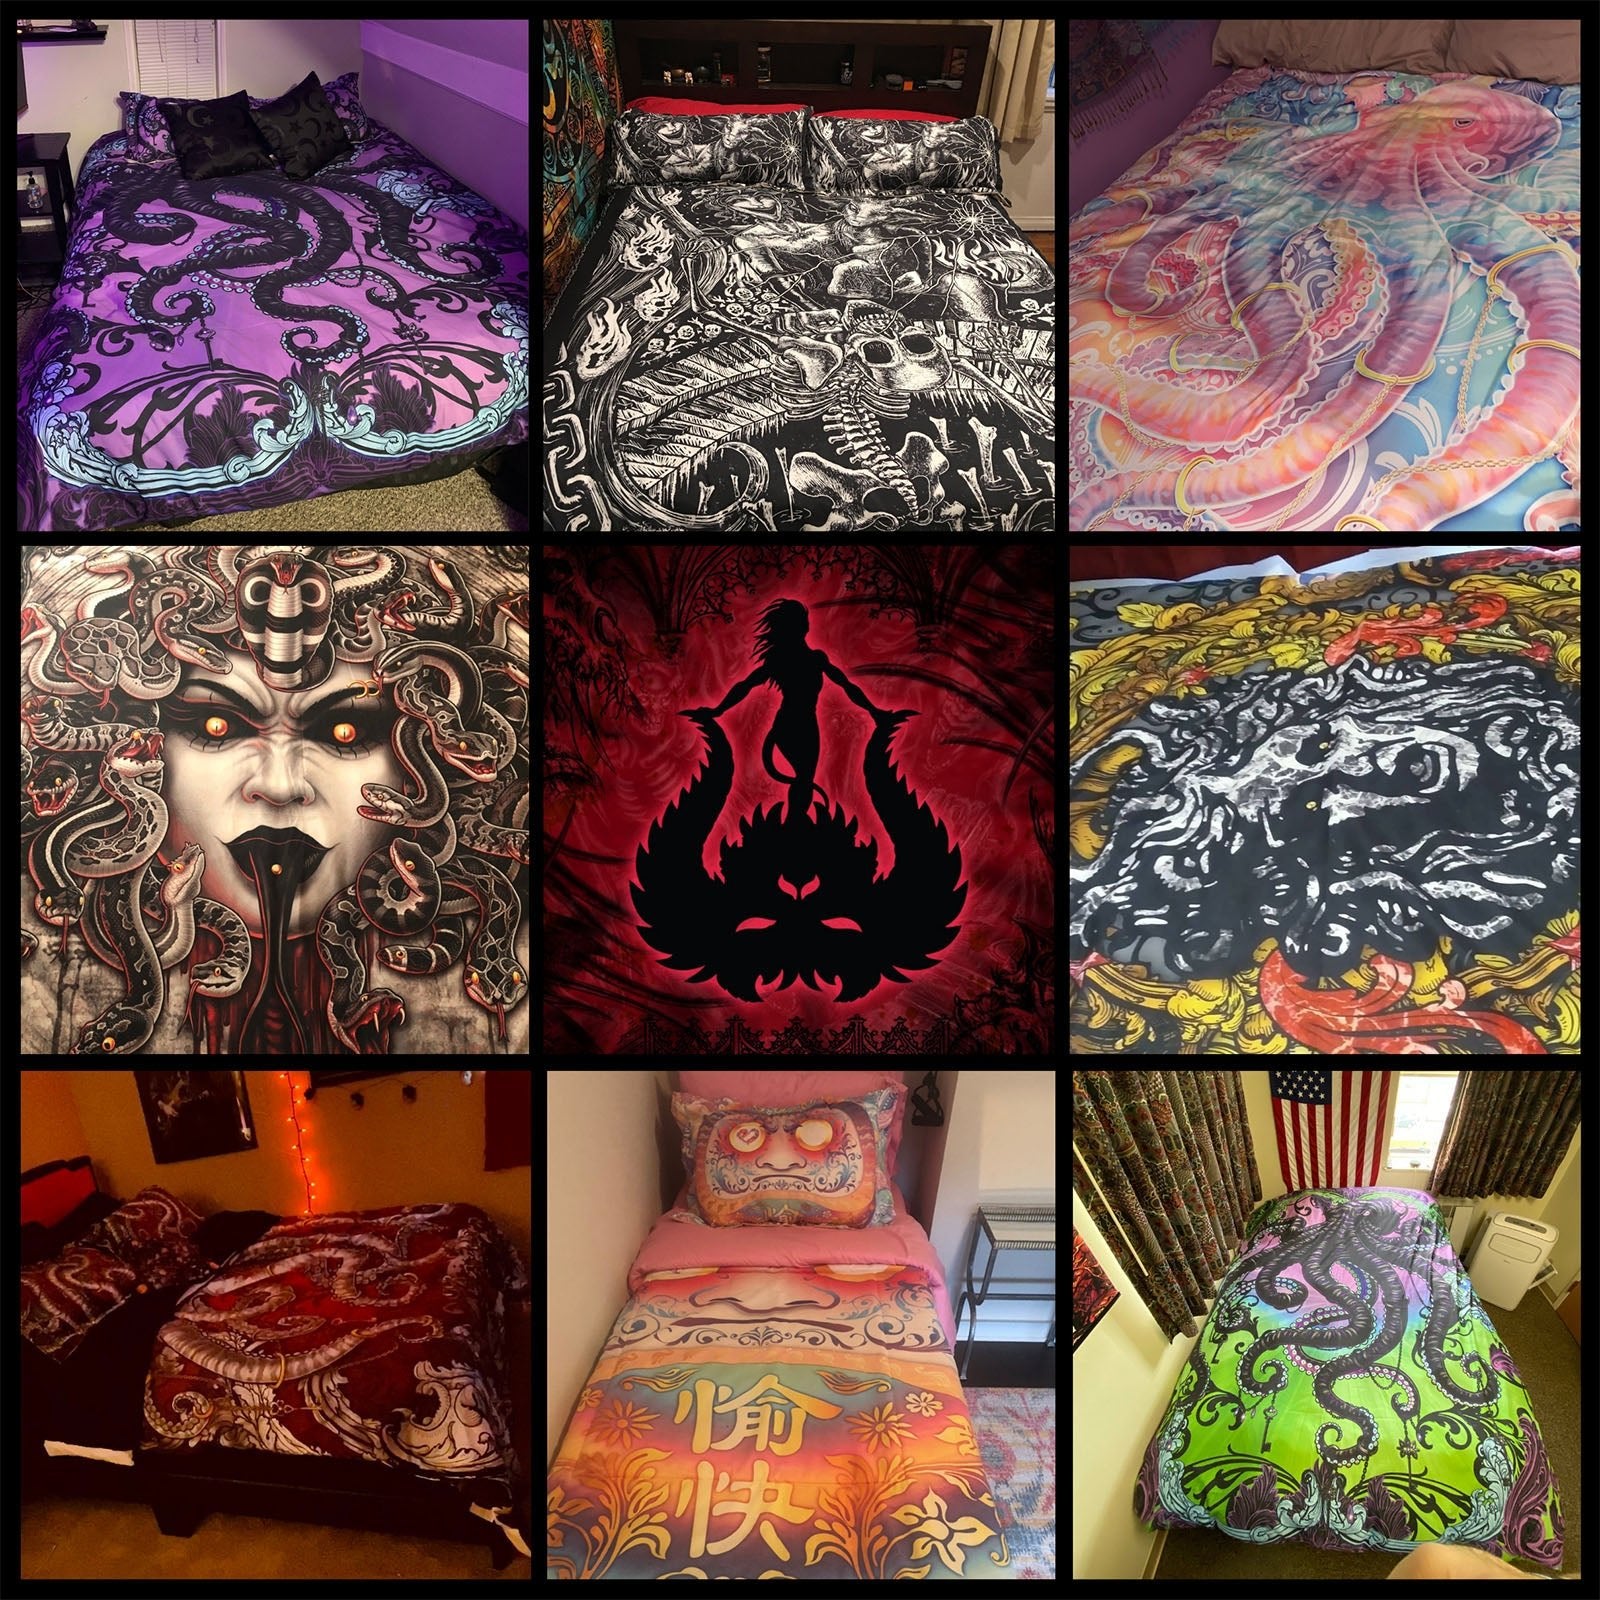 Horror Bedding Set, Comforter and Duvet, Gothic Neon Medusa, Goth Bed Cover and Bedroom Decor, King, Queen and Twin Size - 3 Faces - Abysm Internal